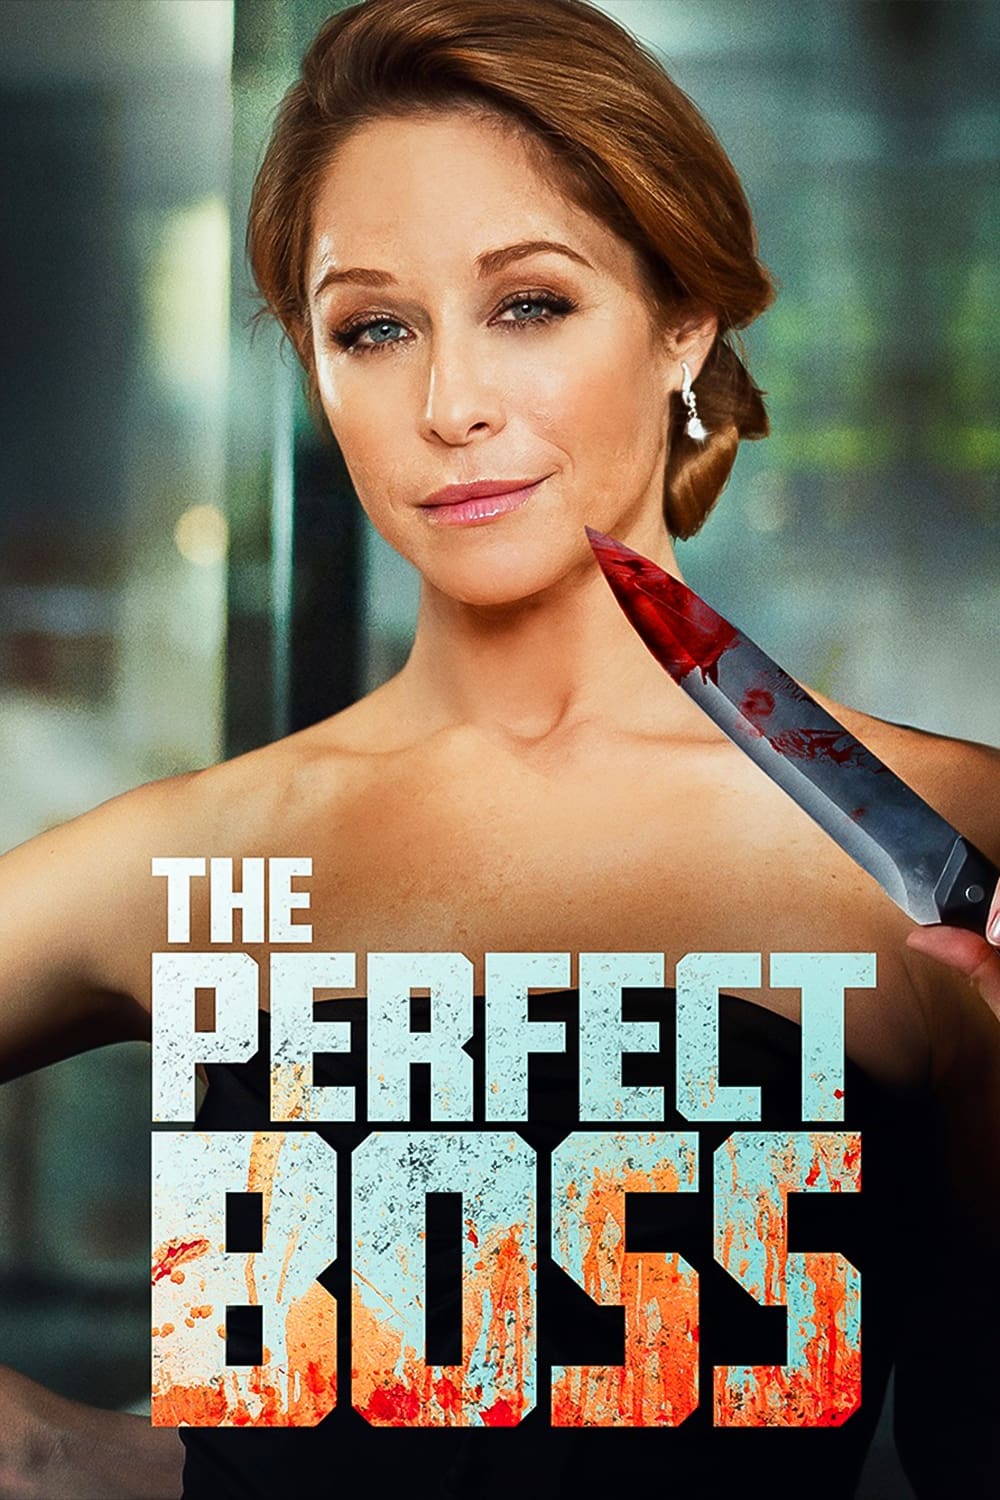 The Perfect Boss (2013)